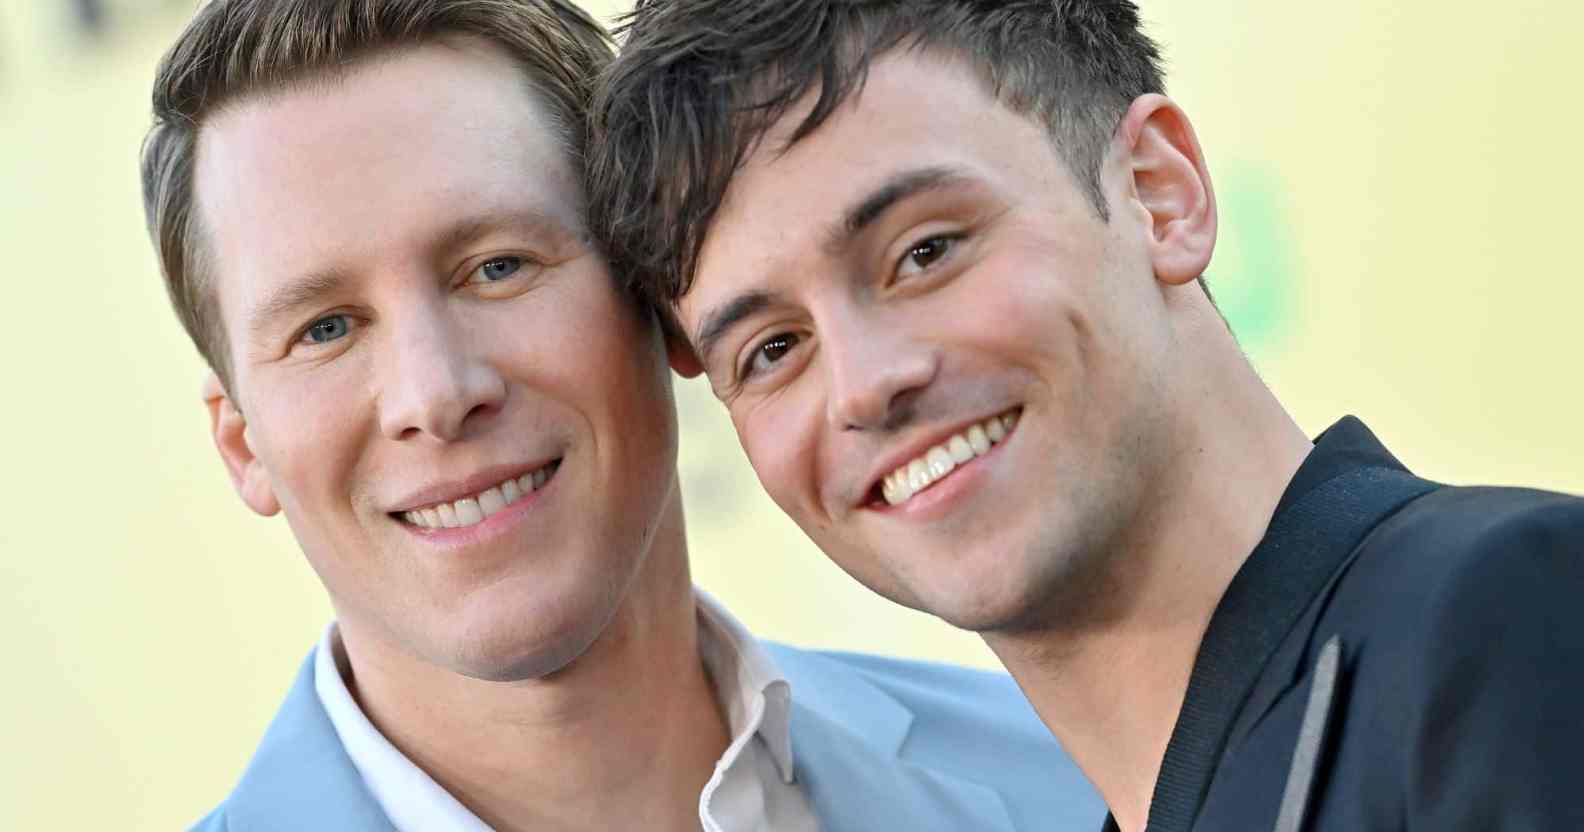 A photo of Dustin Lance Black and Tom Daley posed together